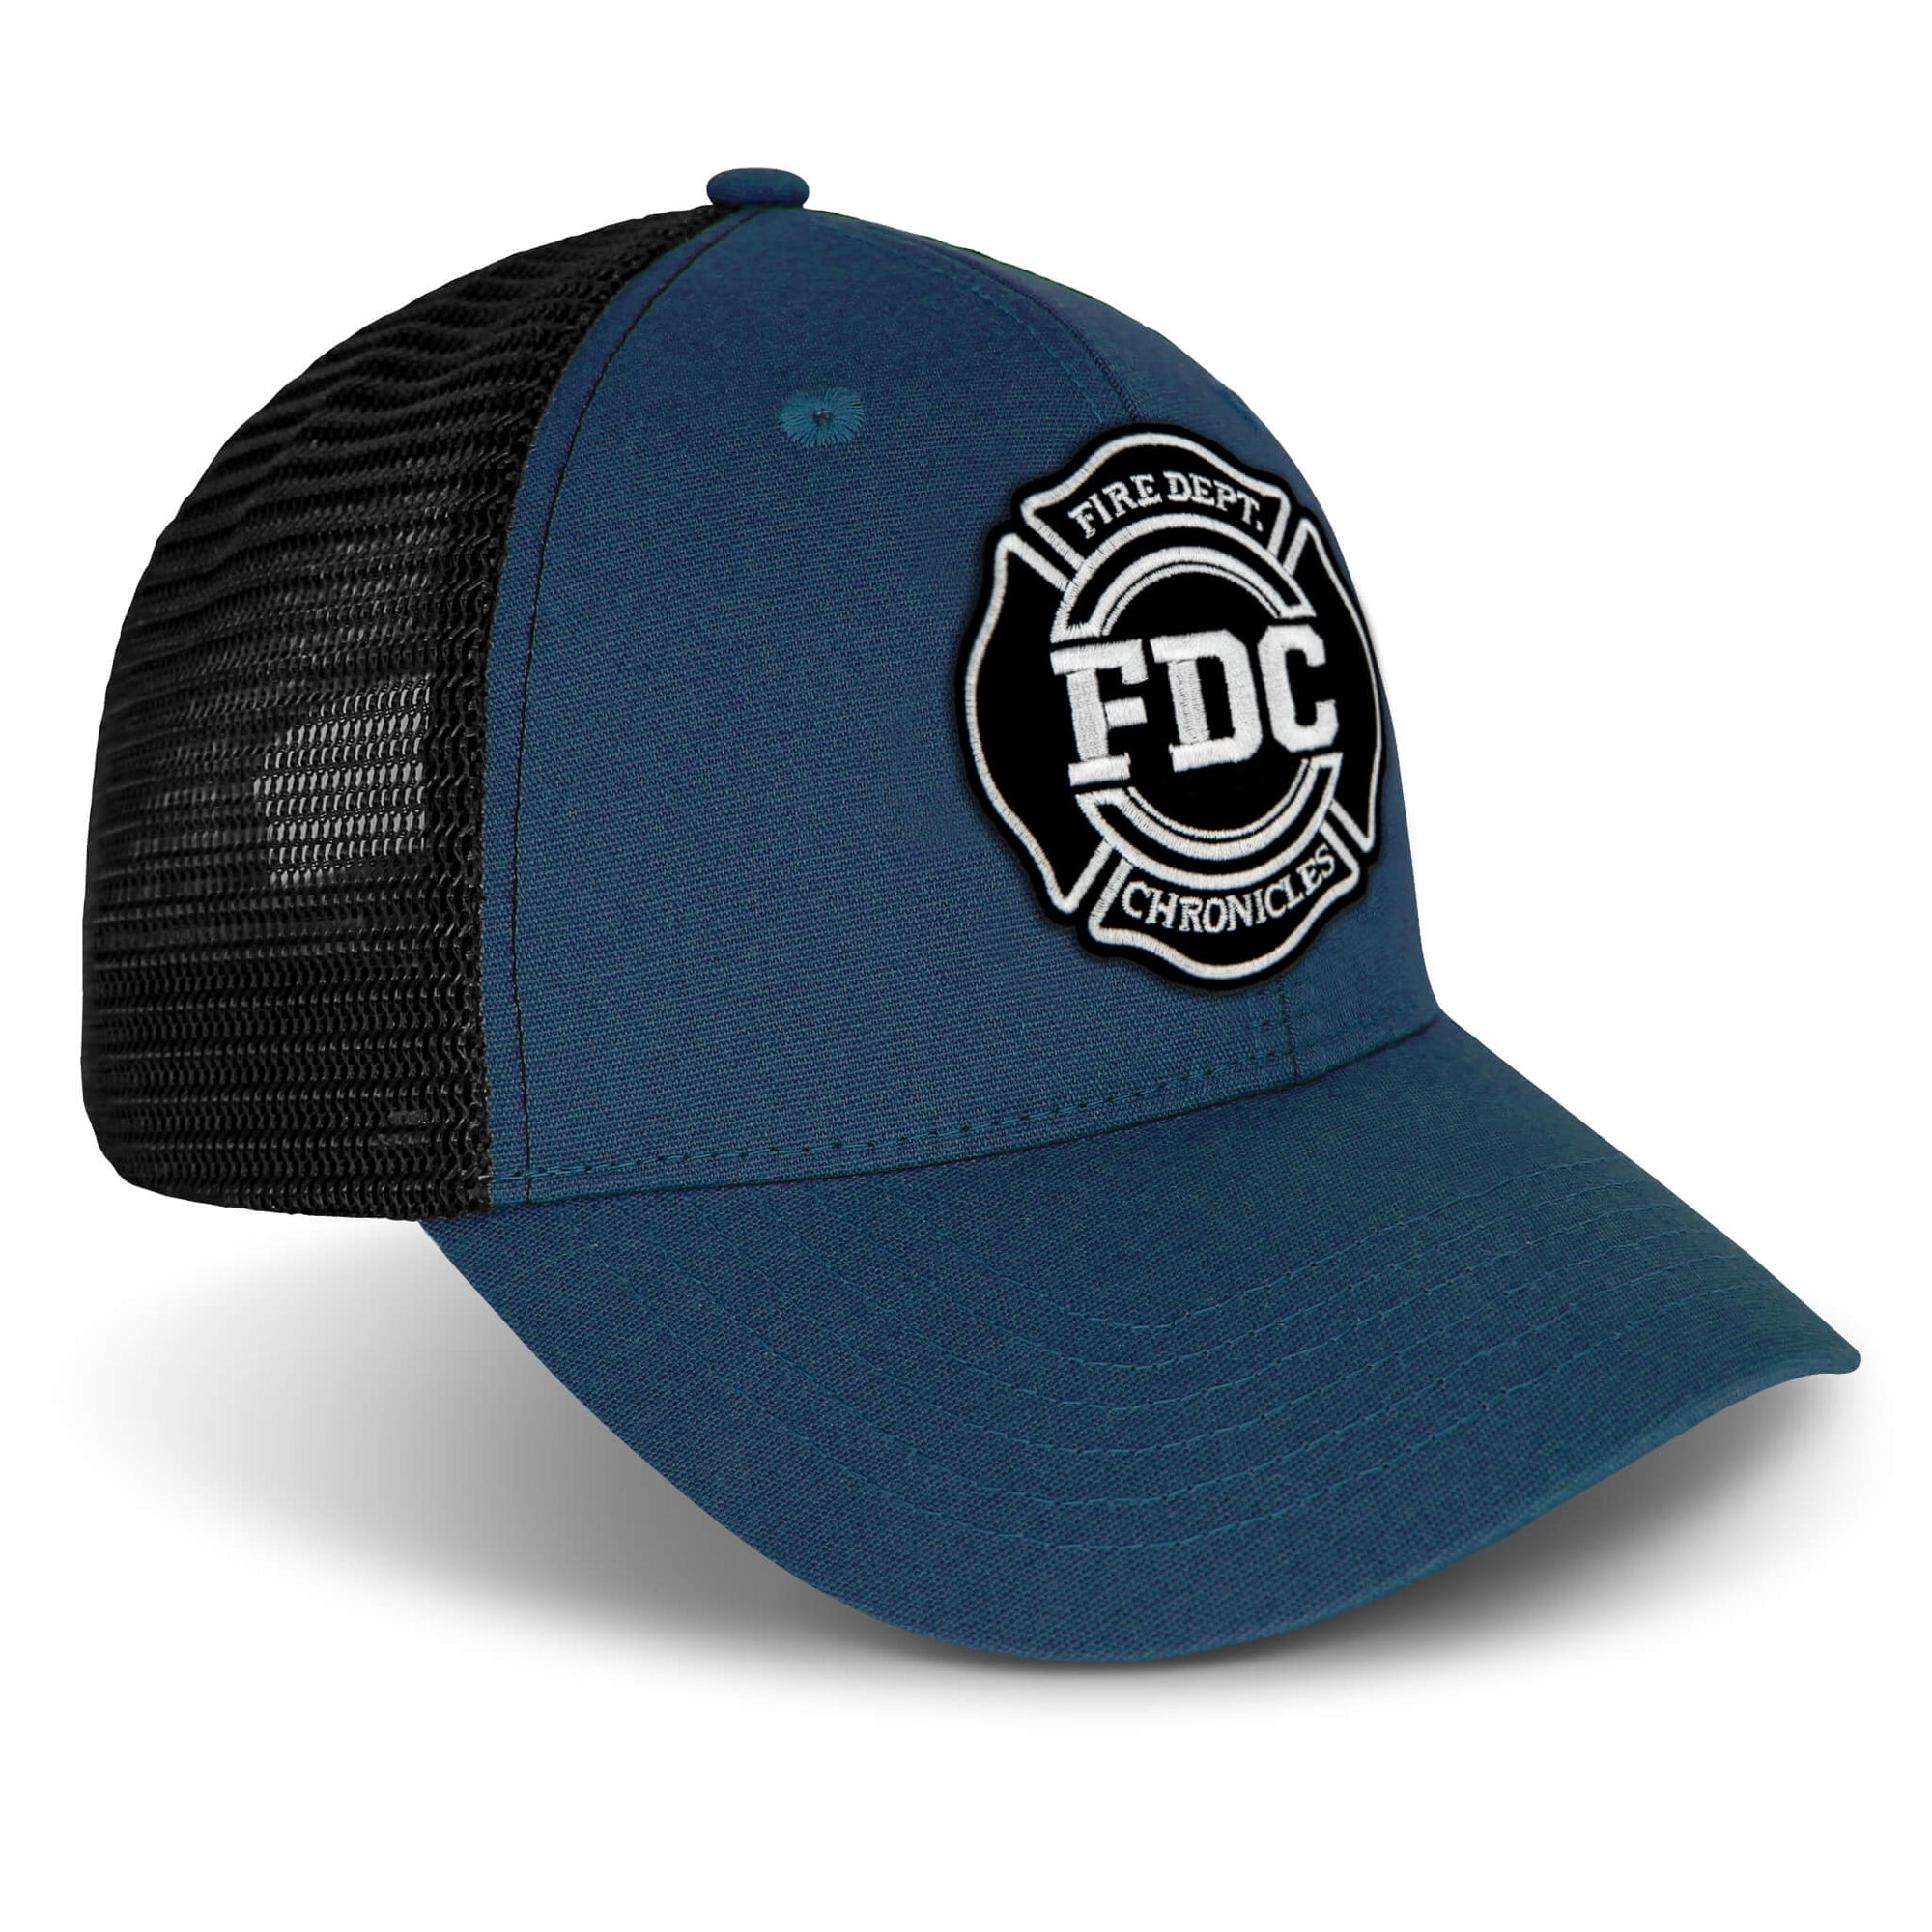 Front/Side angle of blue hat with black mesh back. This hat features a Fire Department Chronicles black and white logo on the front of the hat.